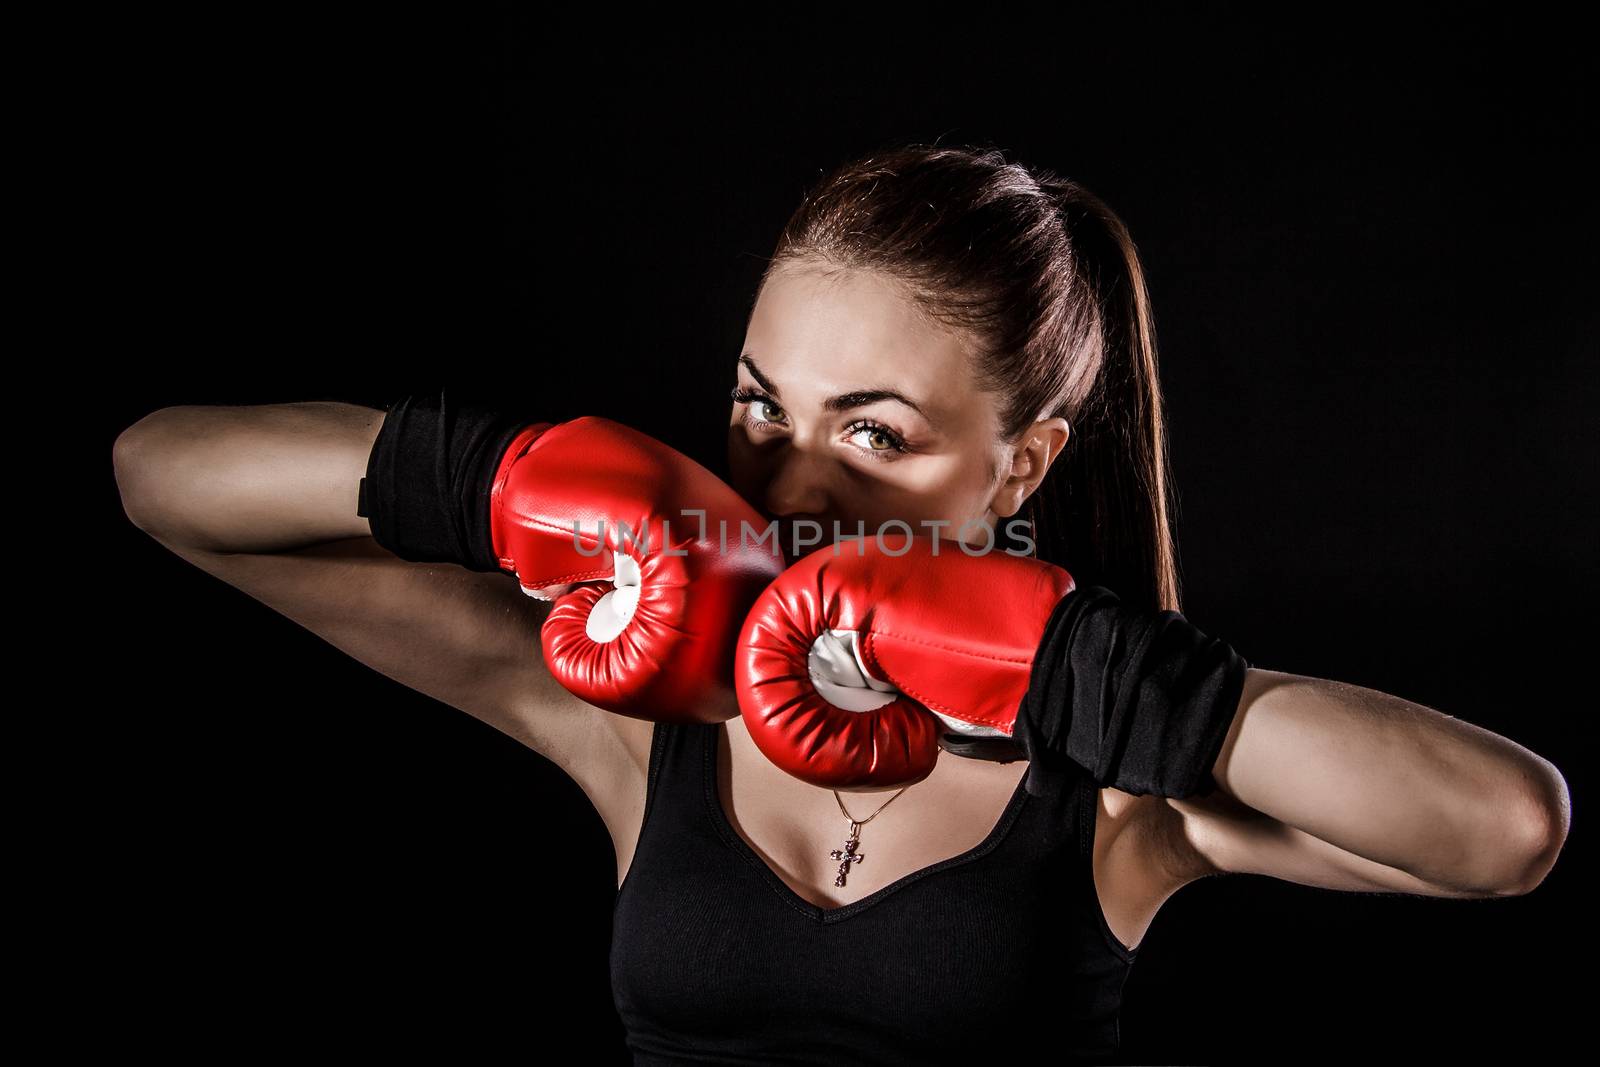 Beautiful young woman in a red boxing gloves over black background